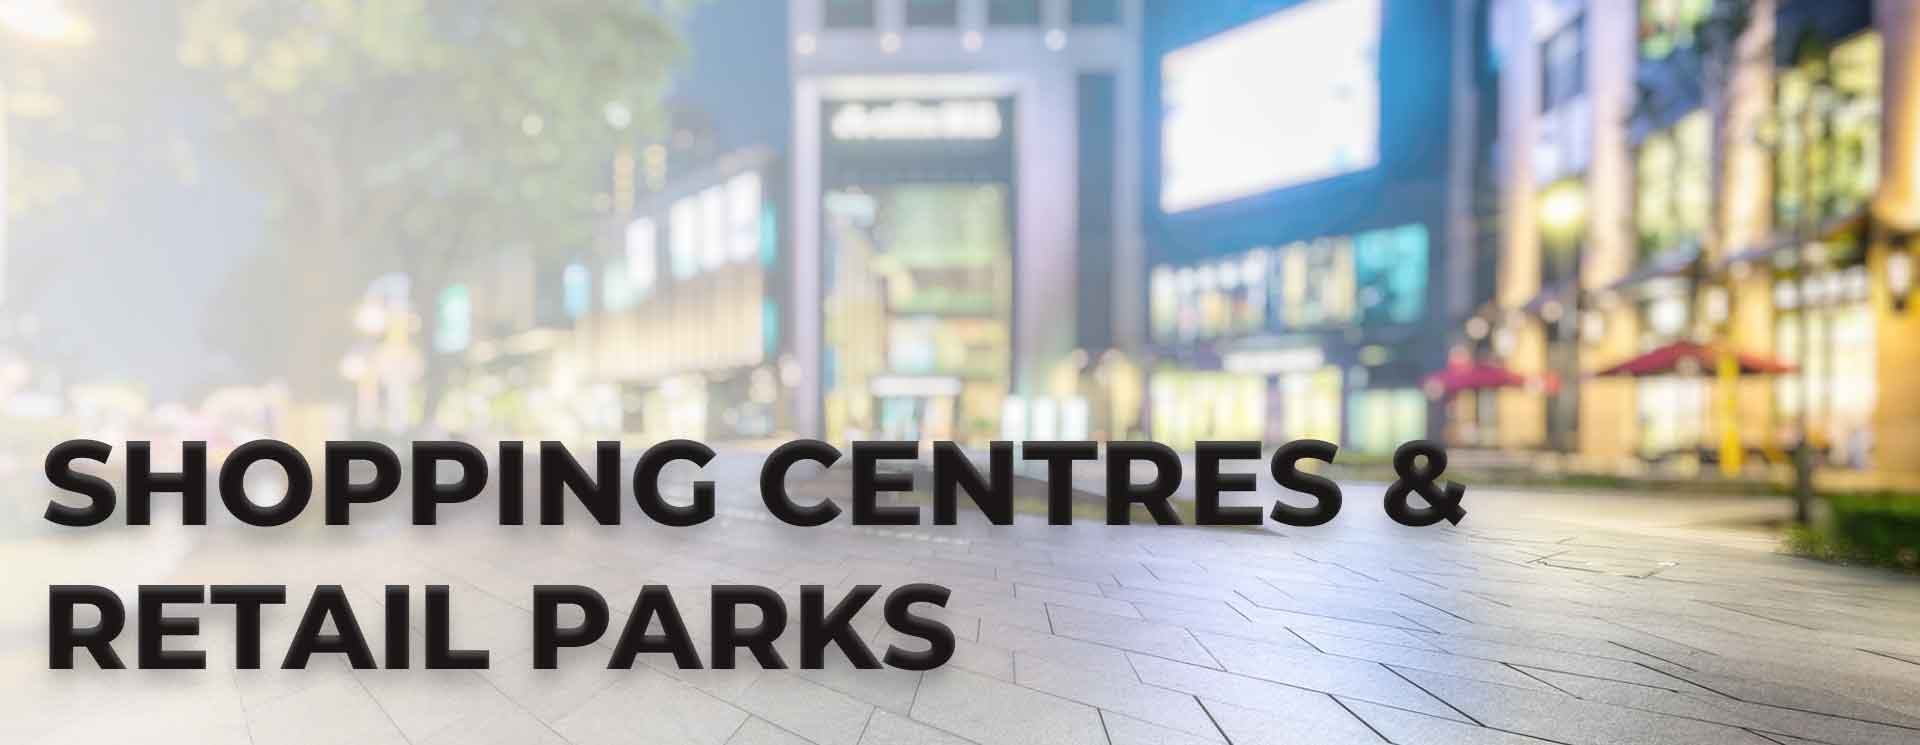 Shopping Centers & Retail Parks